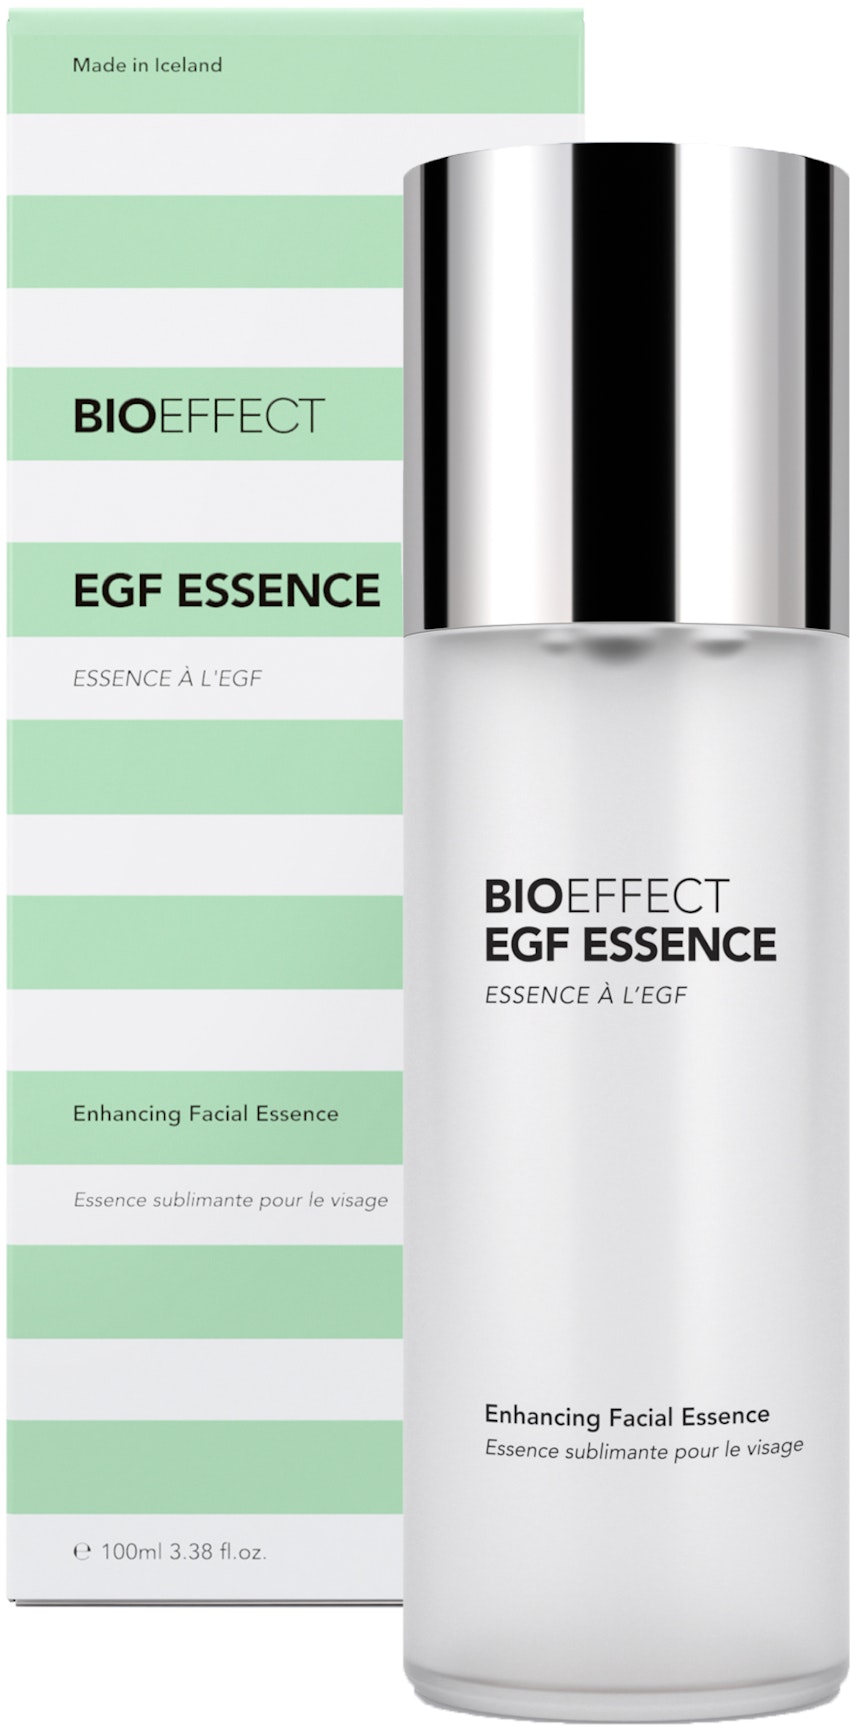 Green-and-white package of BIOEFFECT Pure Skin Care EGF Essence with a clear bottle to the right of the package.